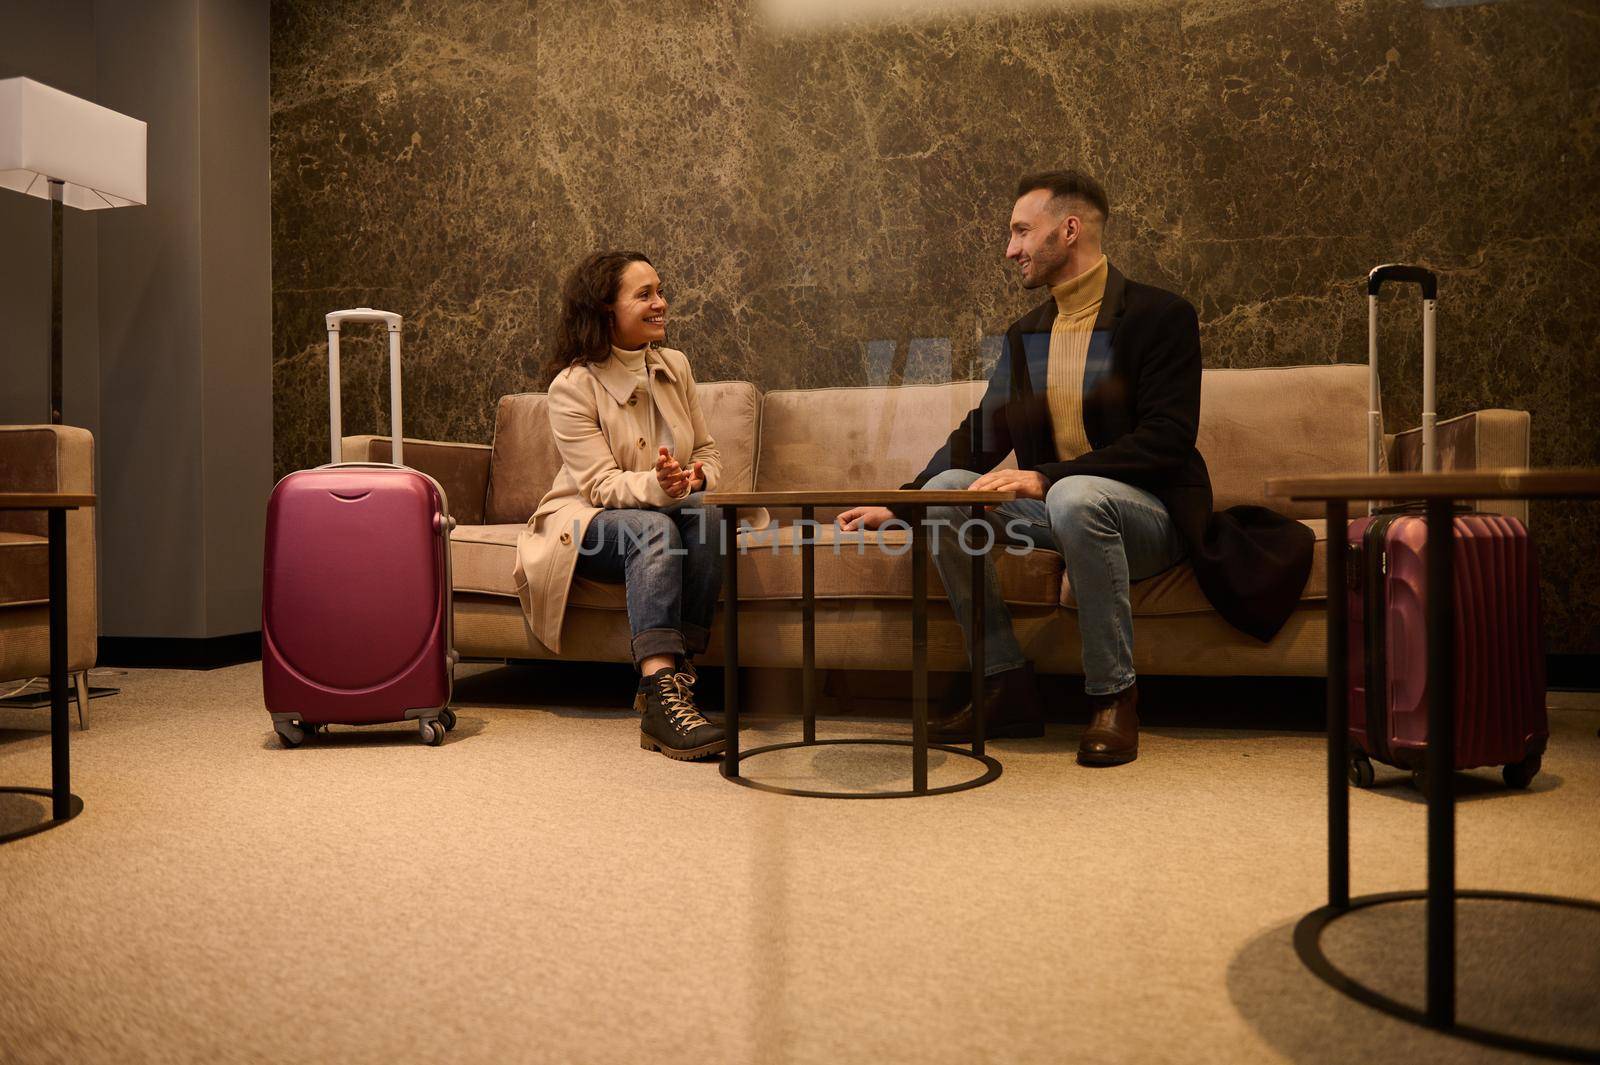 Middle-aged handsome man and pretty woman with suitcases, business partners on a business trip having a conversation in a meeting room while waiting for flight in the airport departure terminal